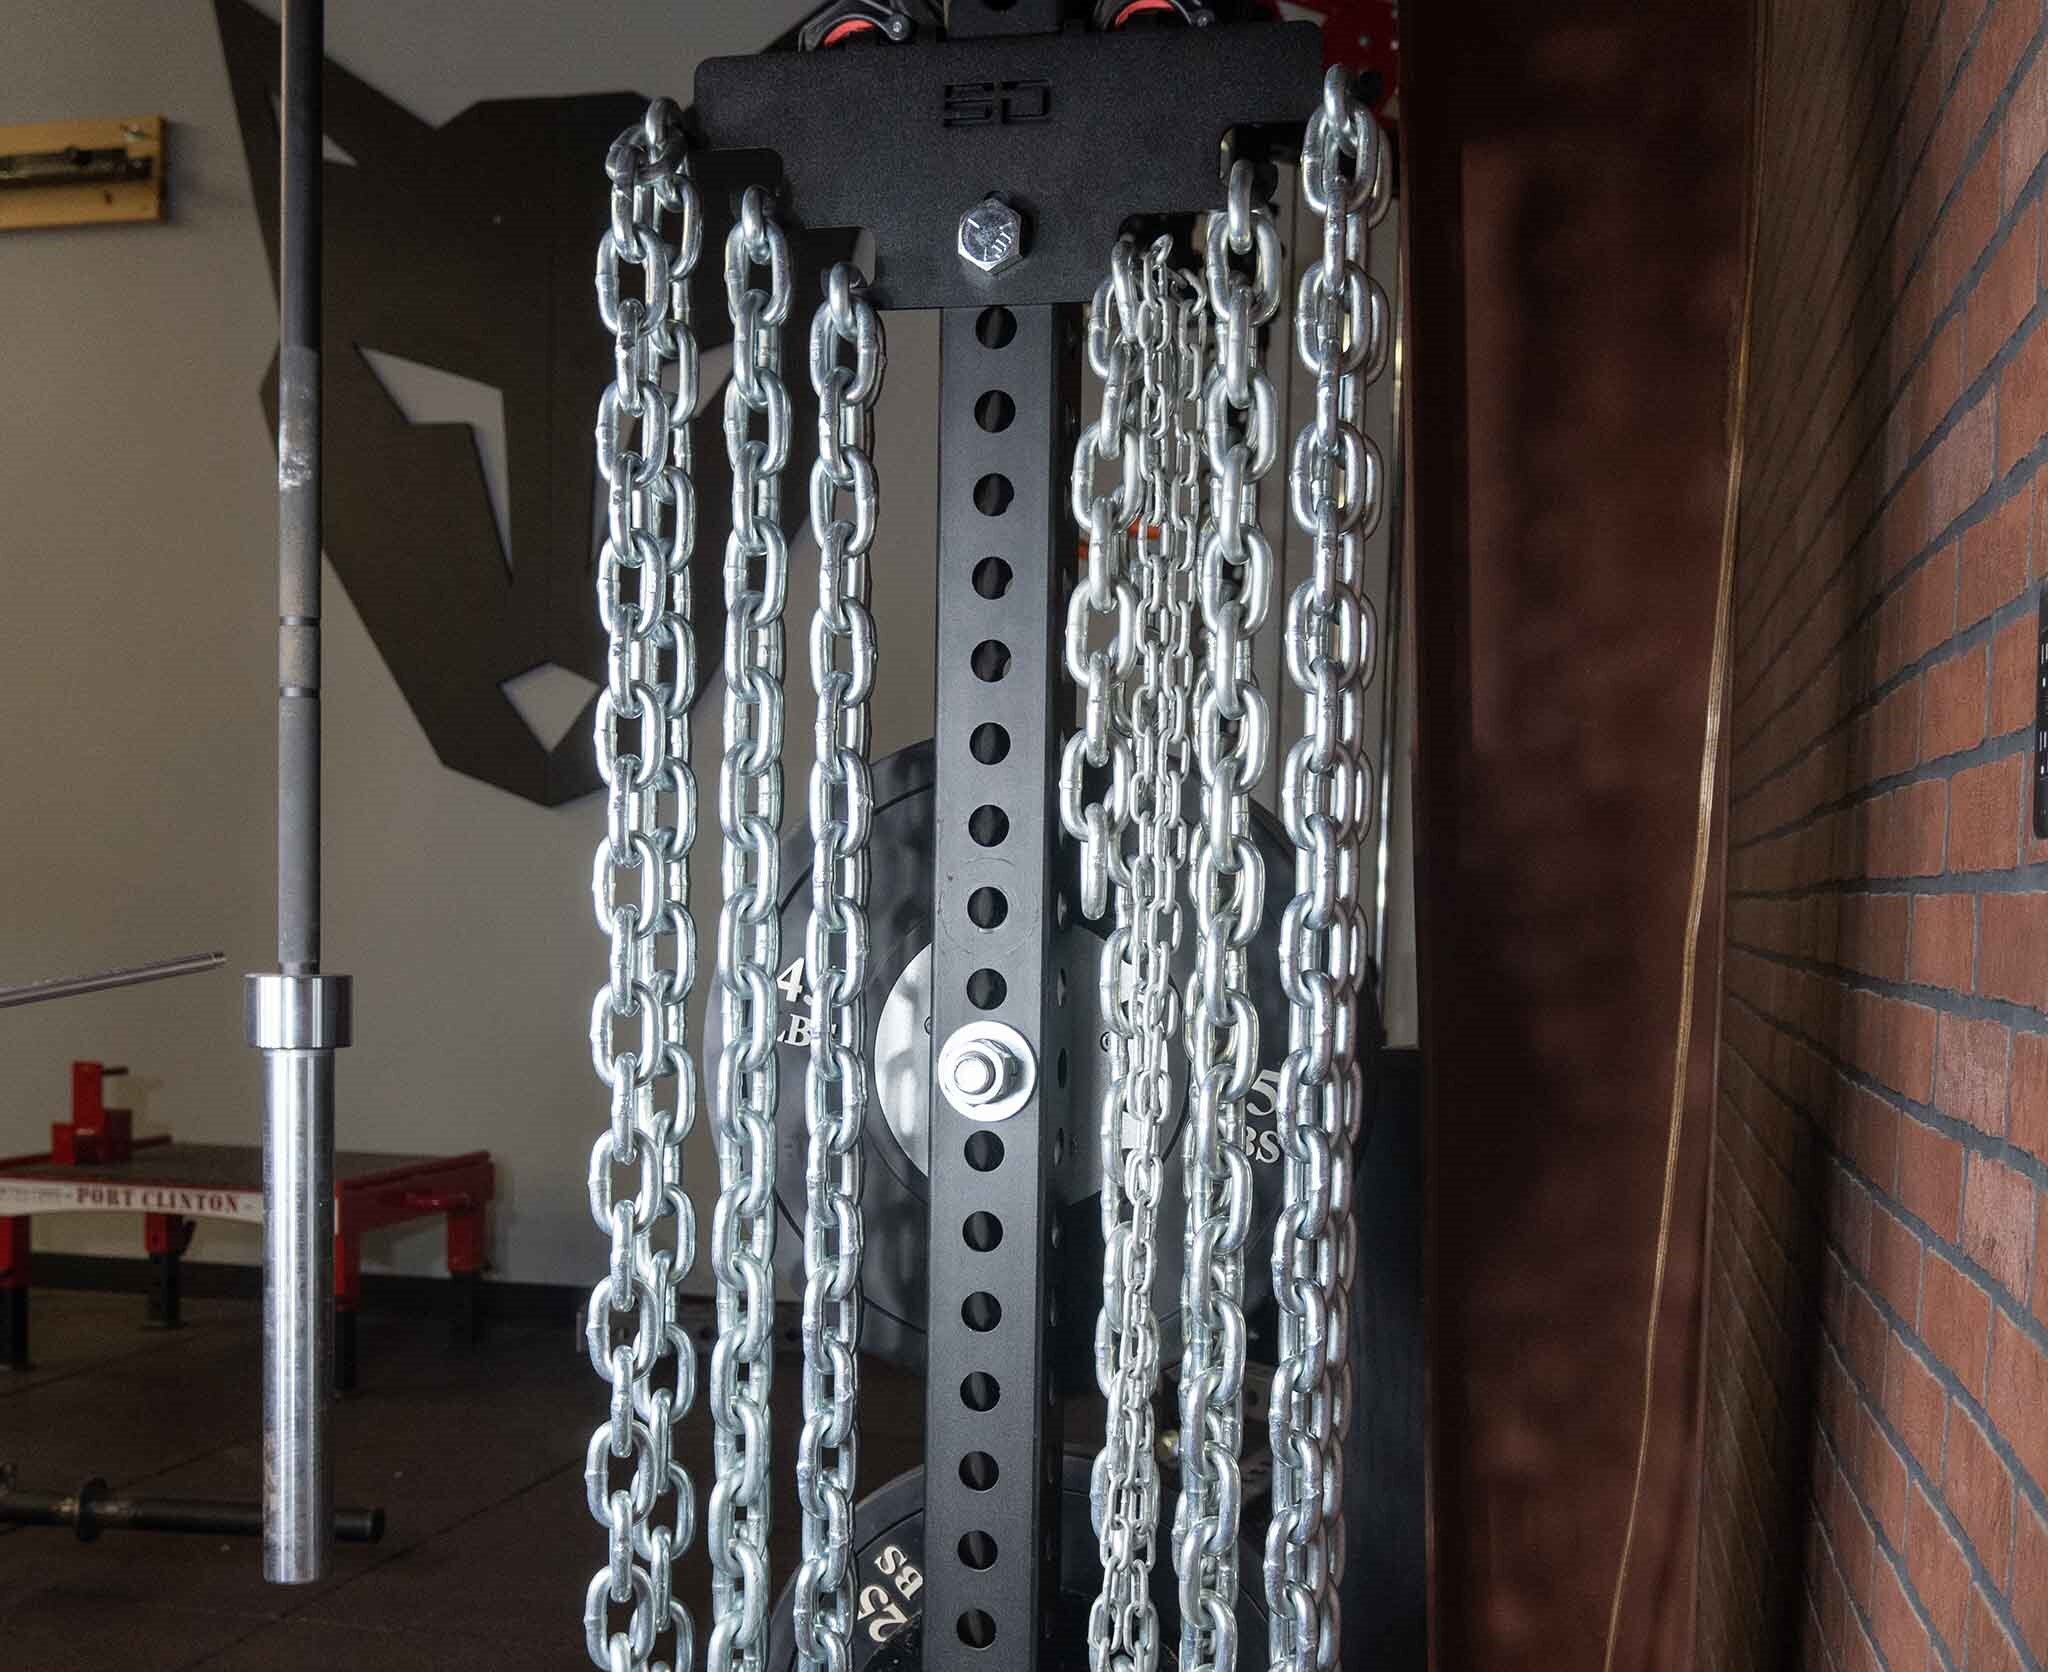 How To Store Chains